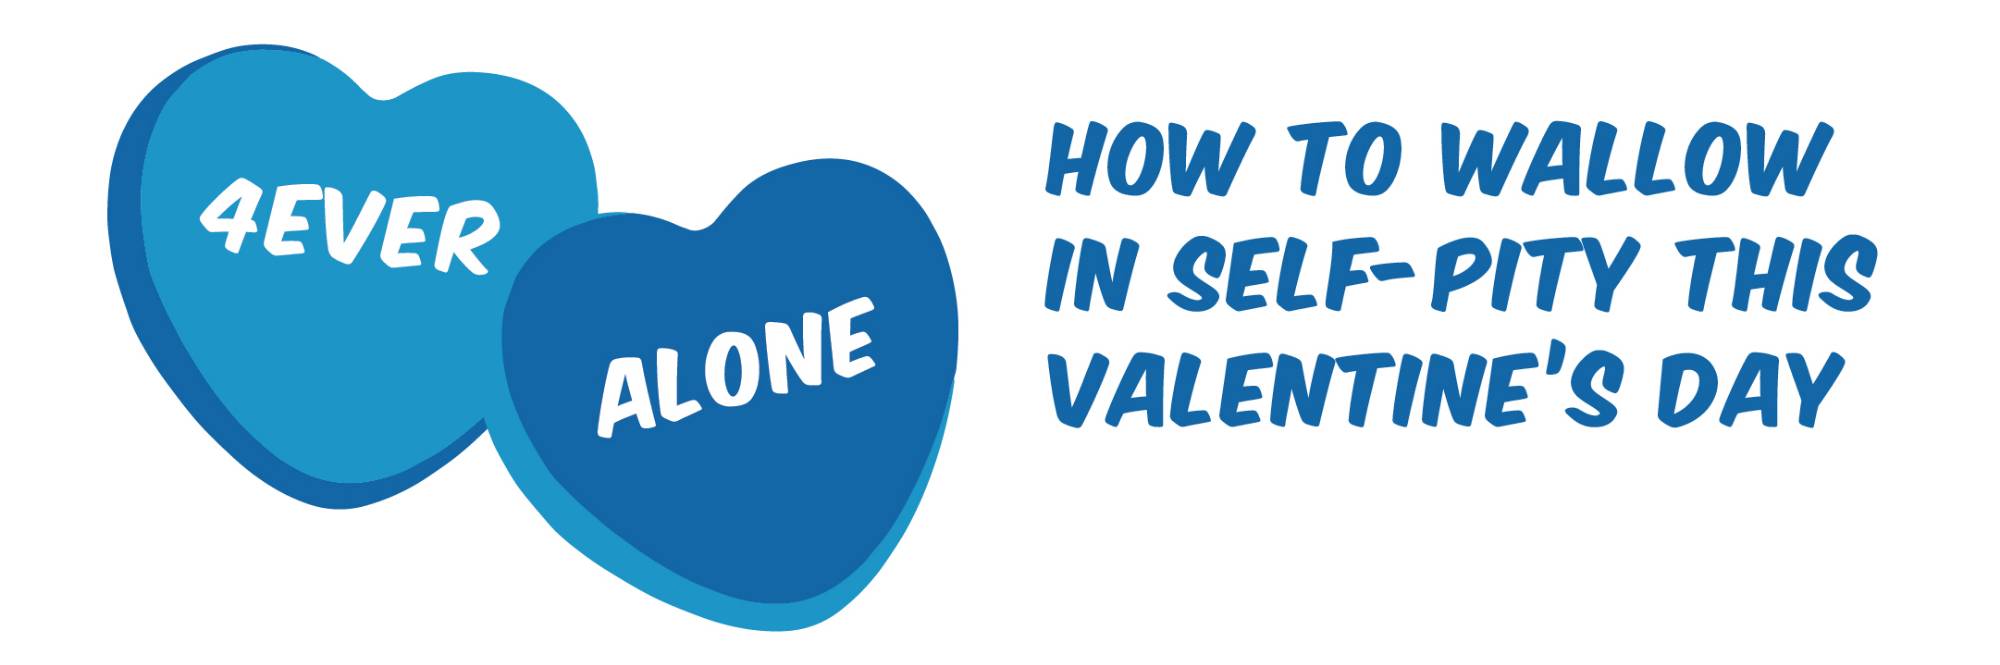 Two blue candy hearts: 4Ever Alone & How to Wallow in Self-Pity This Valentines Day